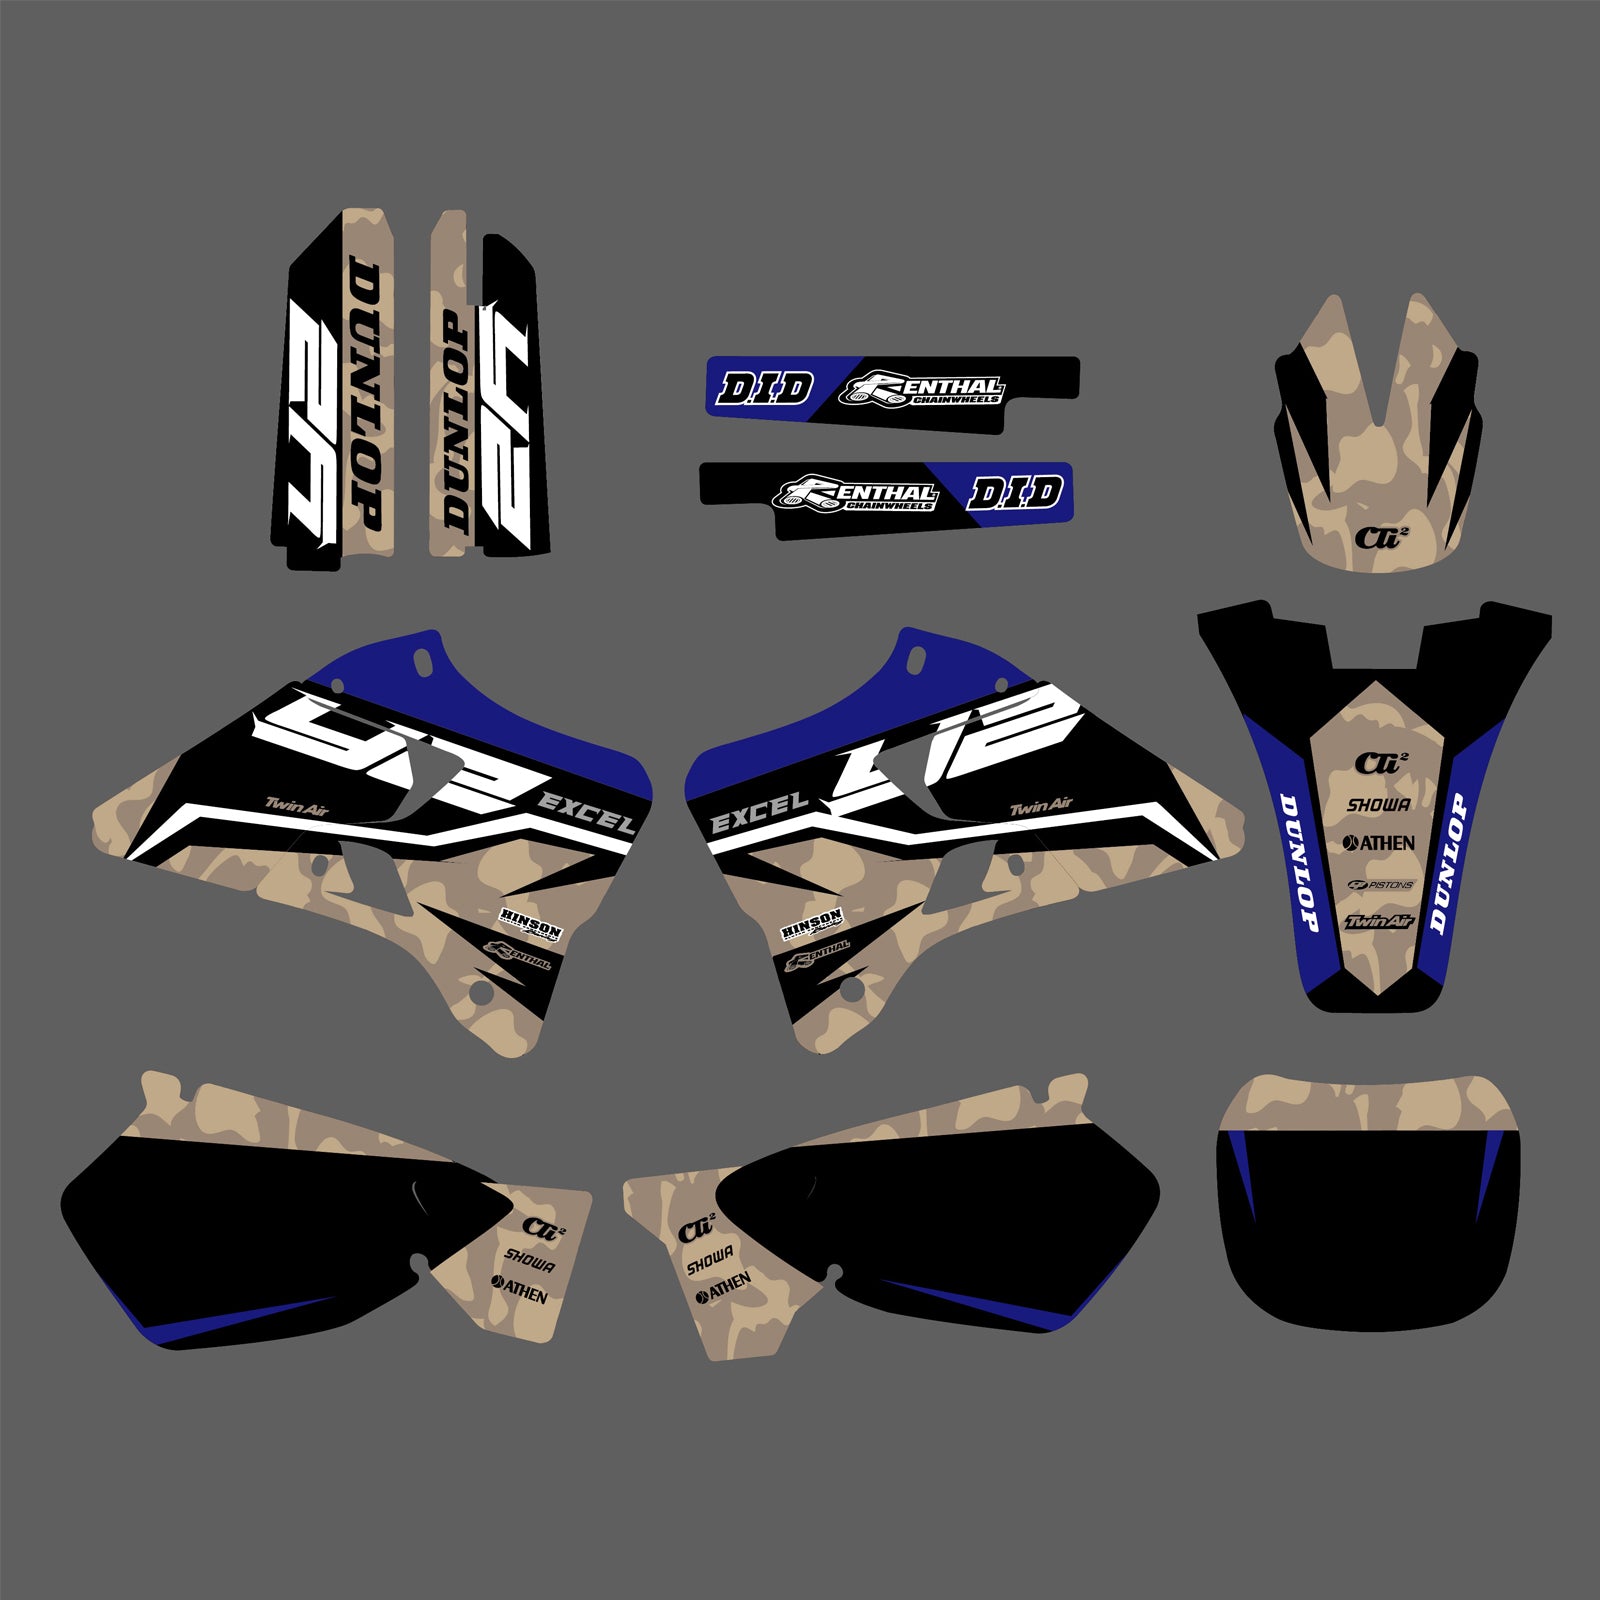 Team Graphics Backgrounds Decals For Yamaha YZ125 YZ250 1996-2001